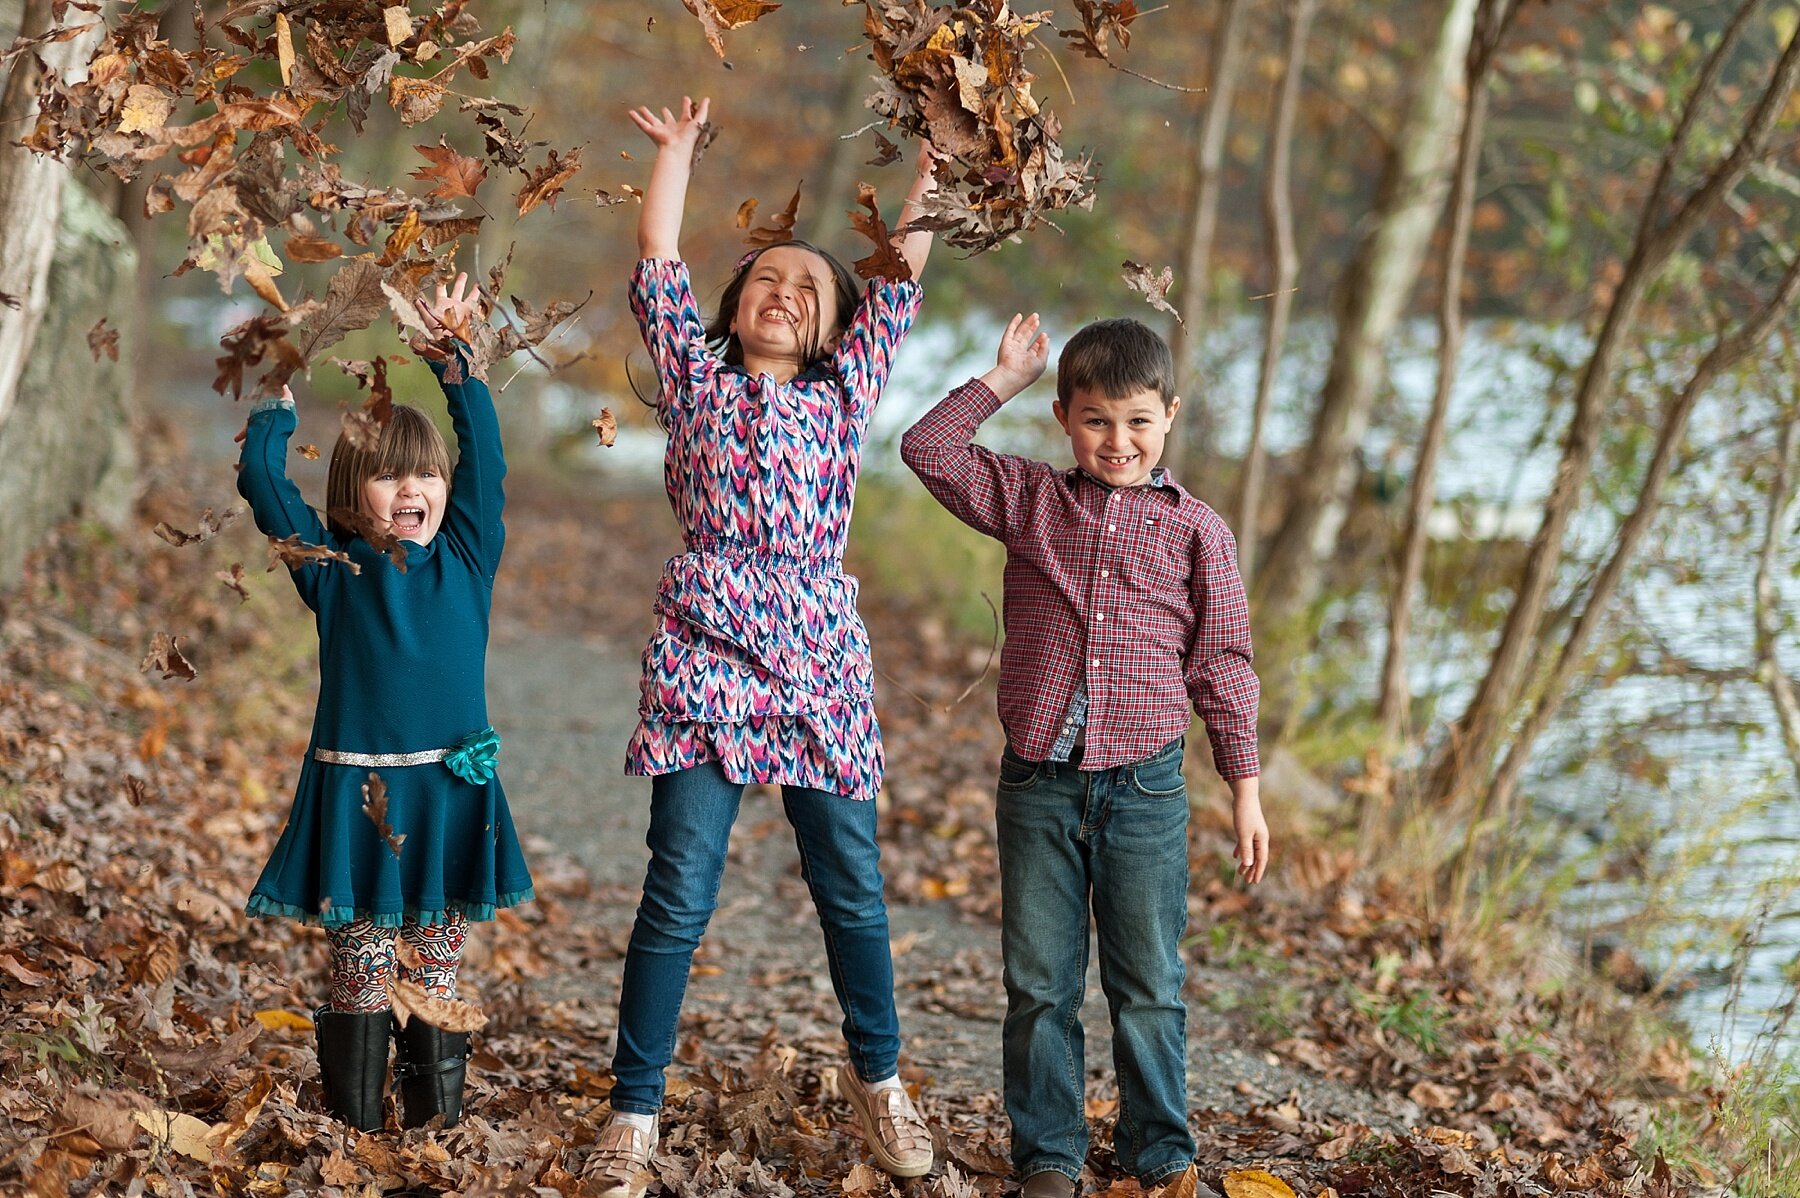 Wendy Zook Photography | Frederick MD family photographer, Frederick Maryland family photos, Christmas card photo tips, tips for Christmas cards, holiday tips, Christmas holiday season